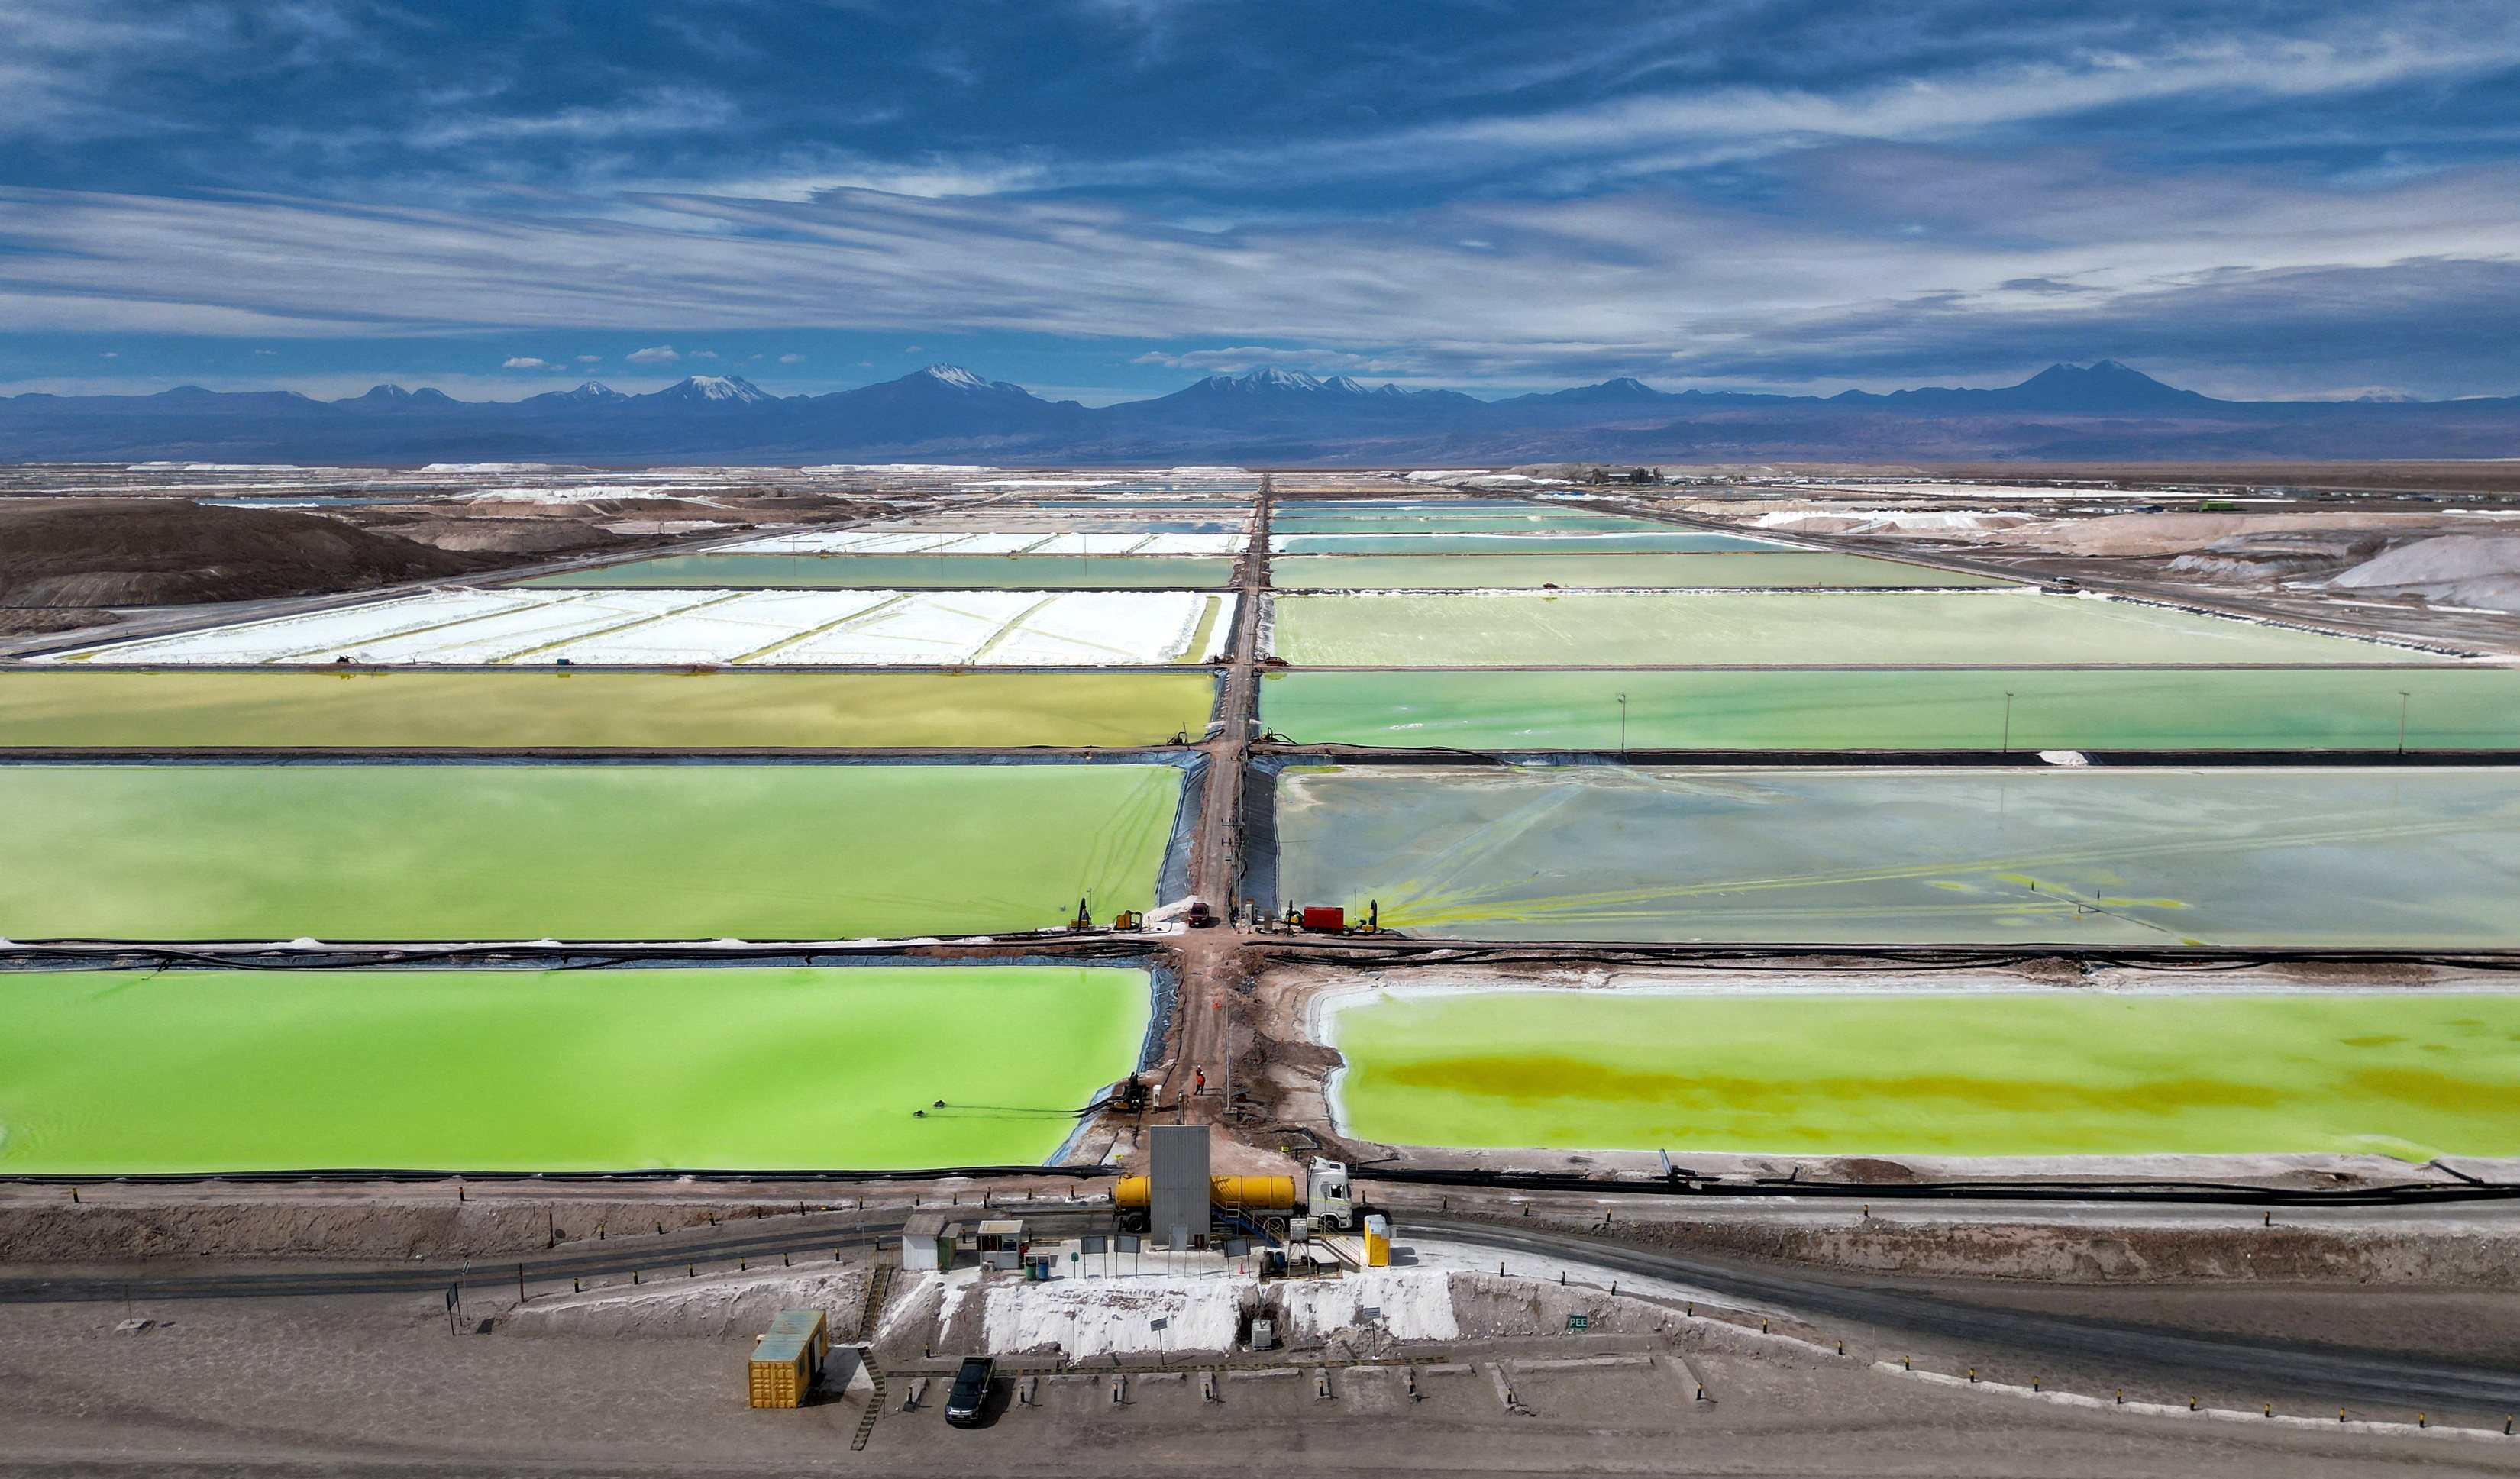 Trucks operate at a lithium mine in Chile in May. Critical minerals such as lithium, nickel and cobalt are essential inputs for military supply chains and clean energy technologies. Photo: Reuters